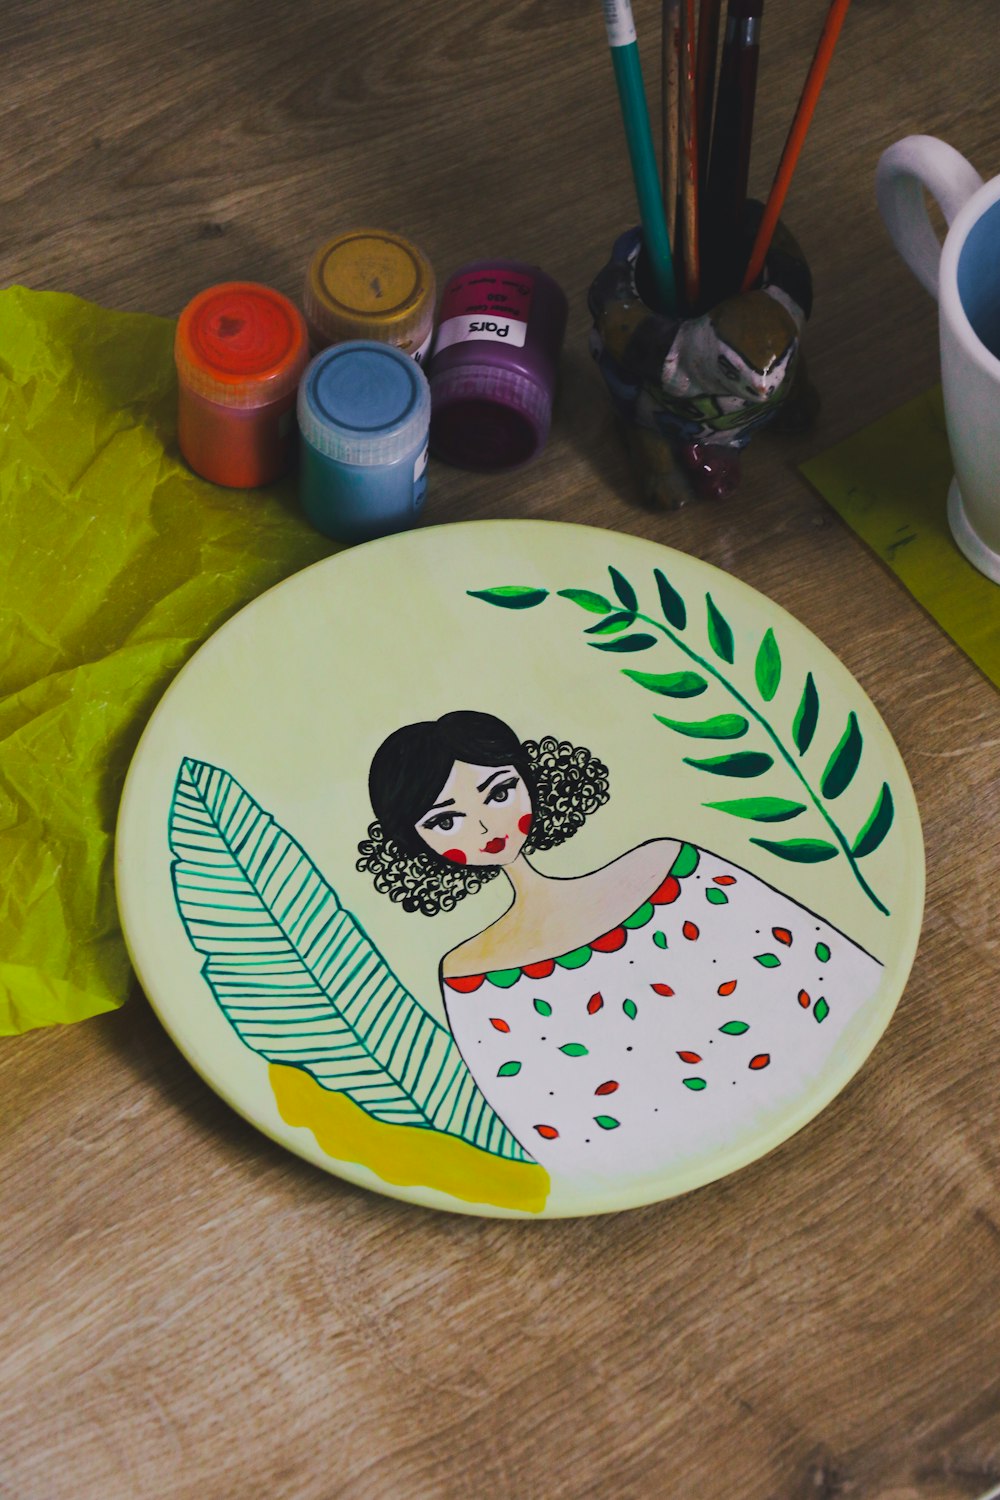 a picture of a woman painted on a plate